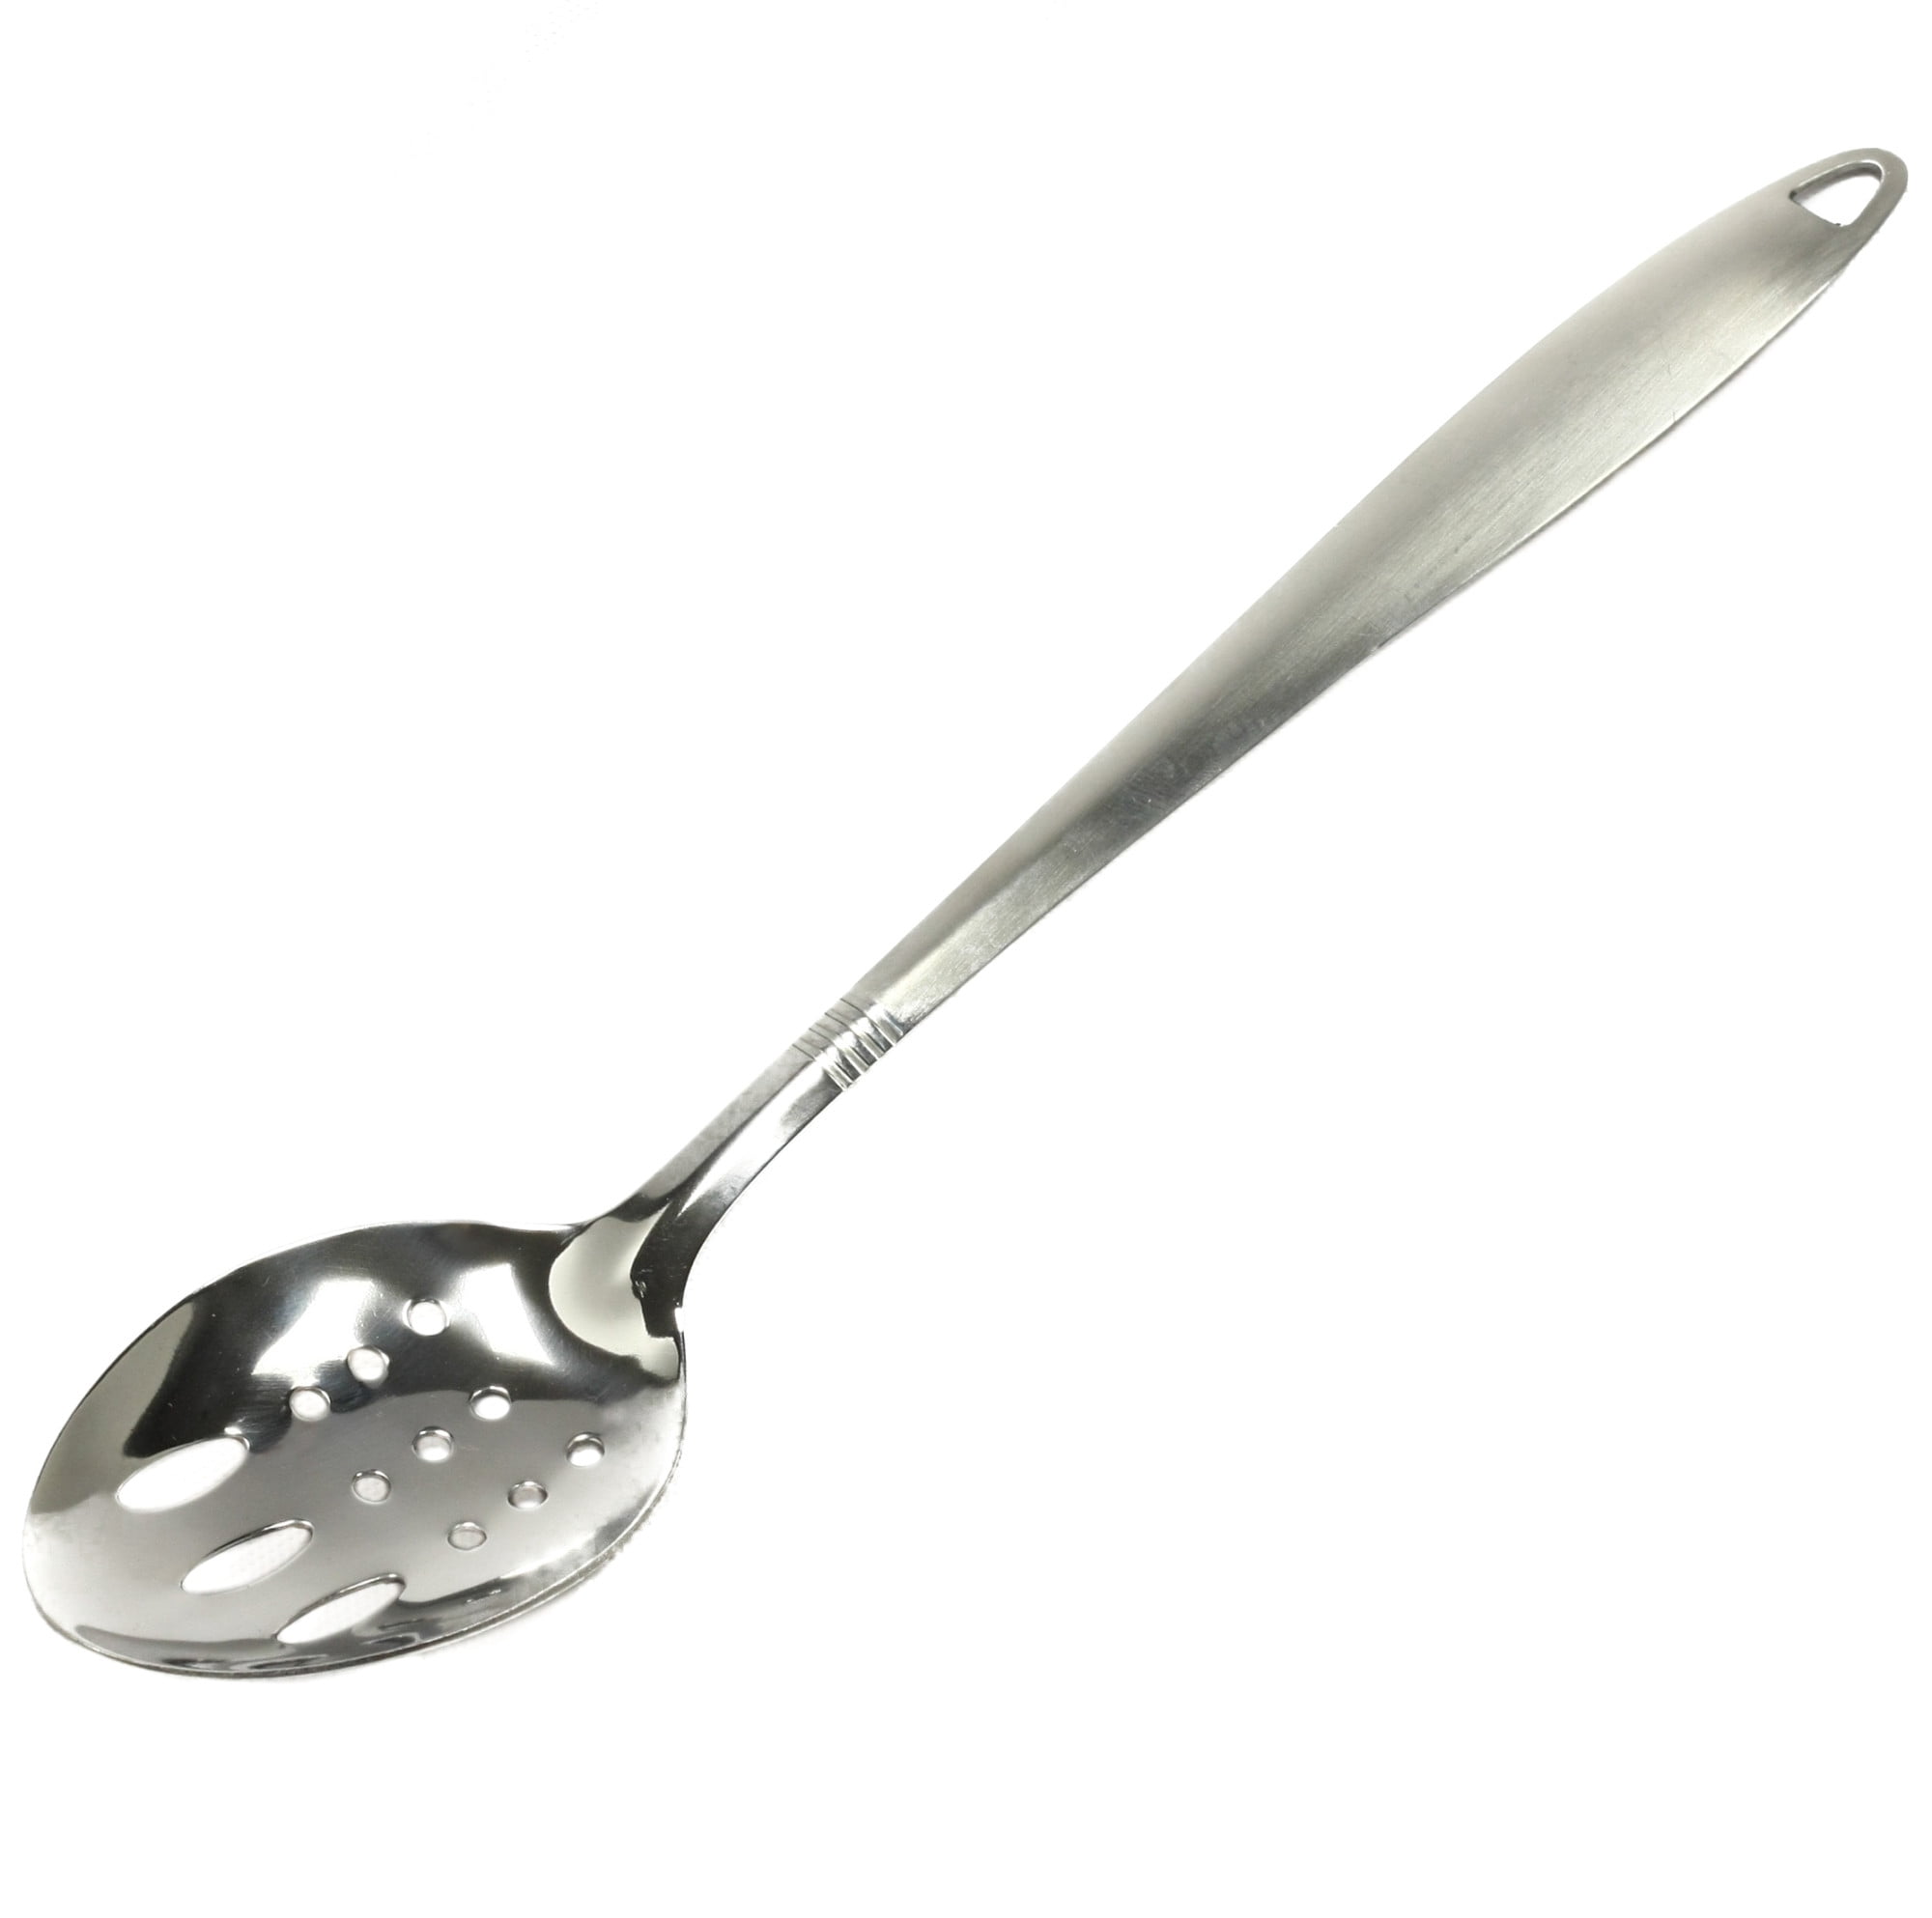 Slotted Spoon - Slotted Cooking Spoons – Pro Chef Kitchen Tools